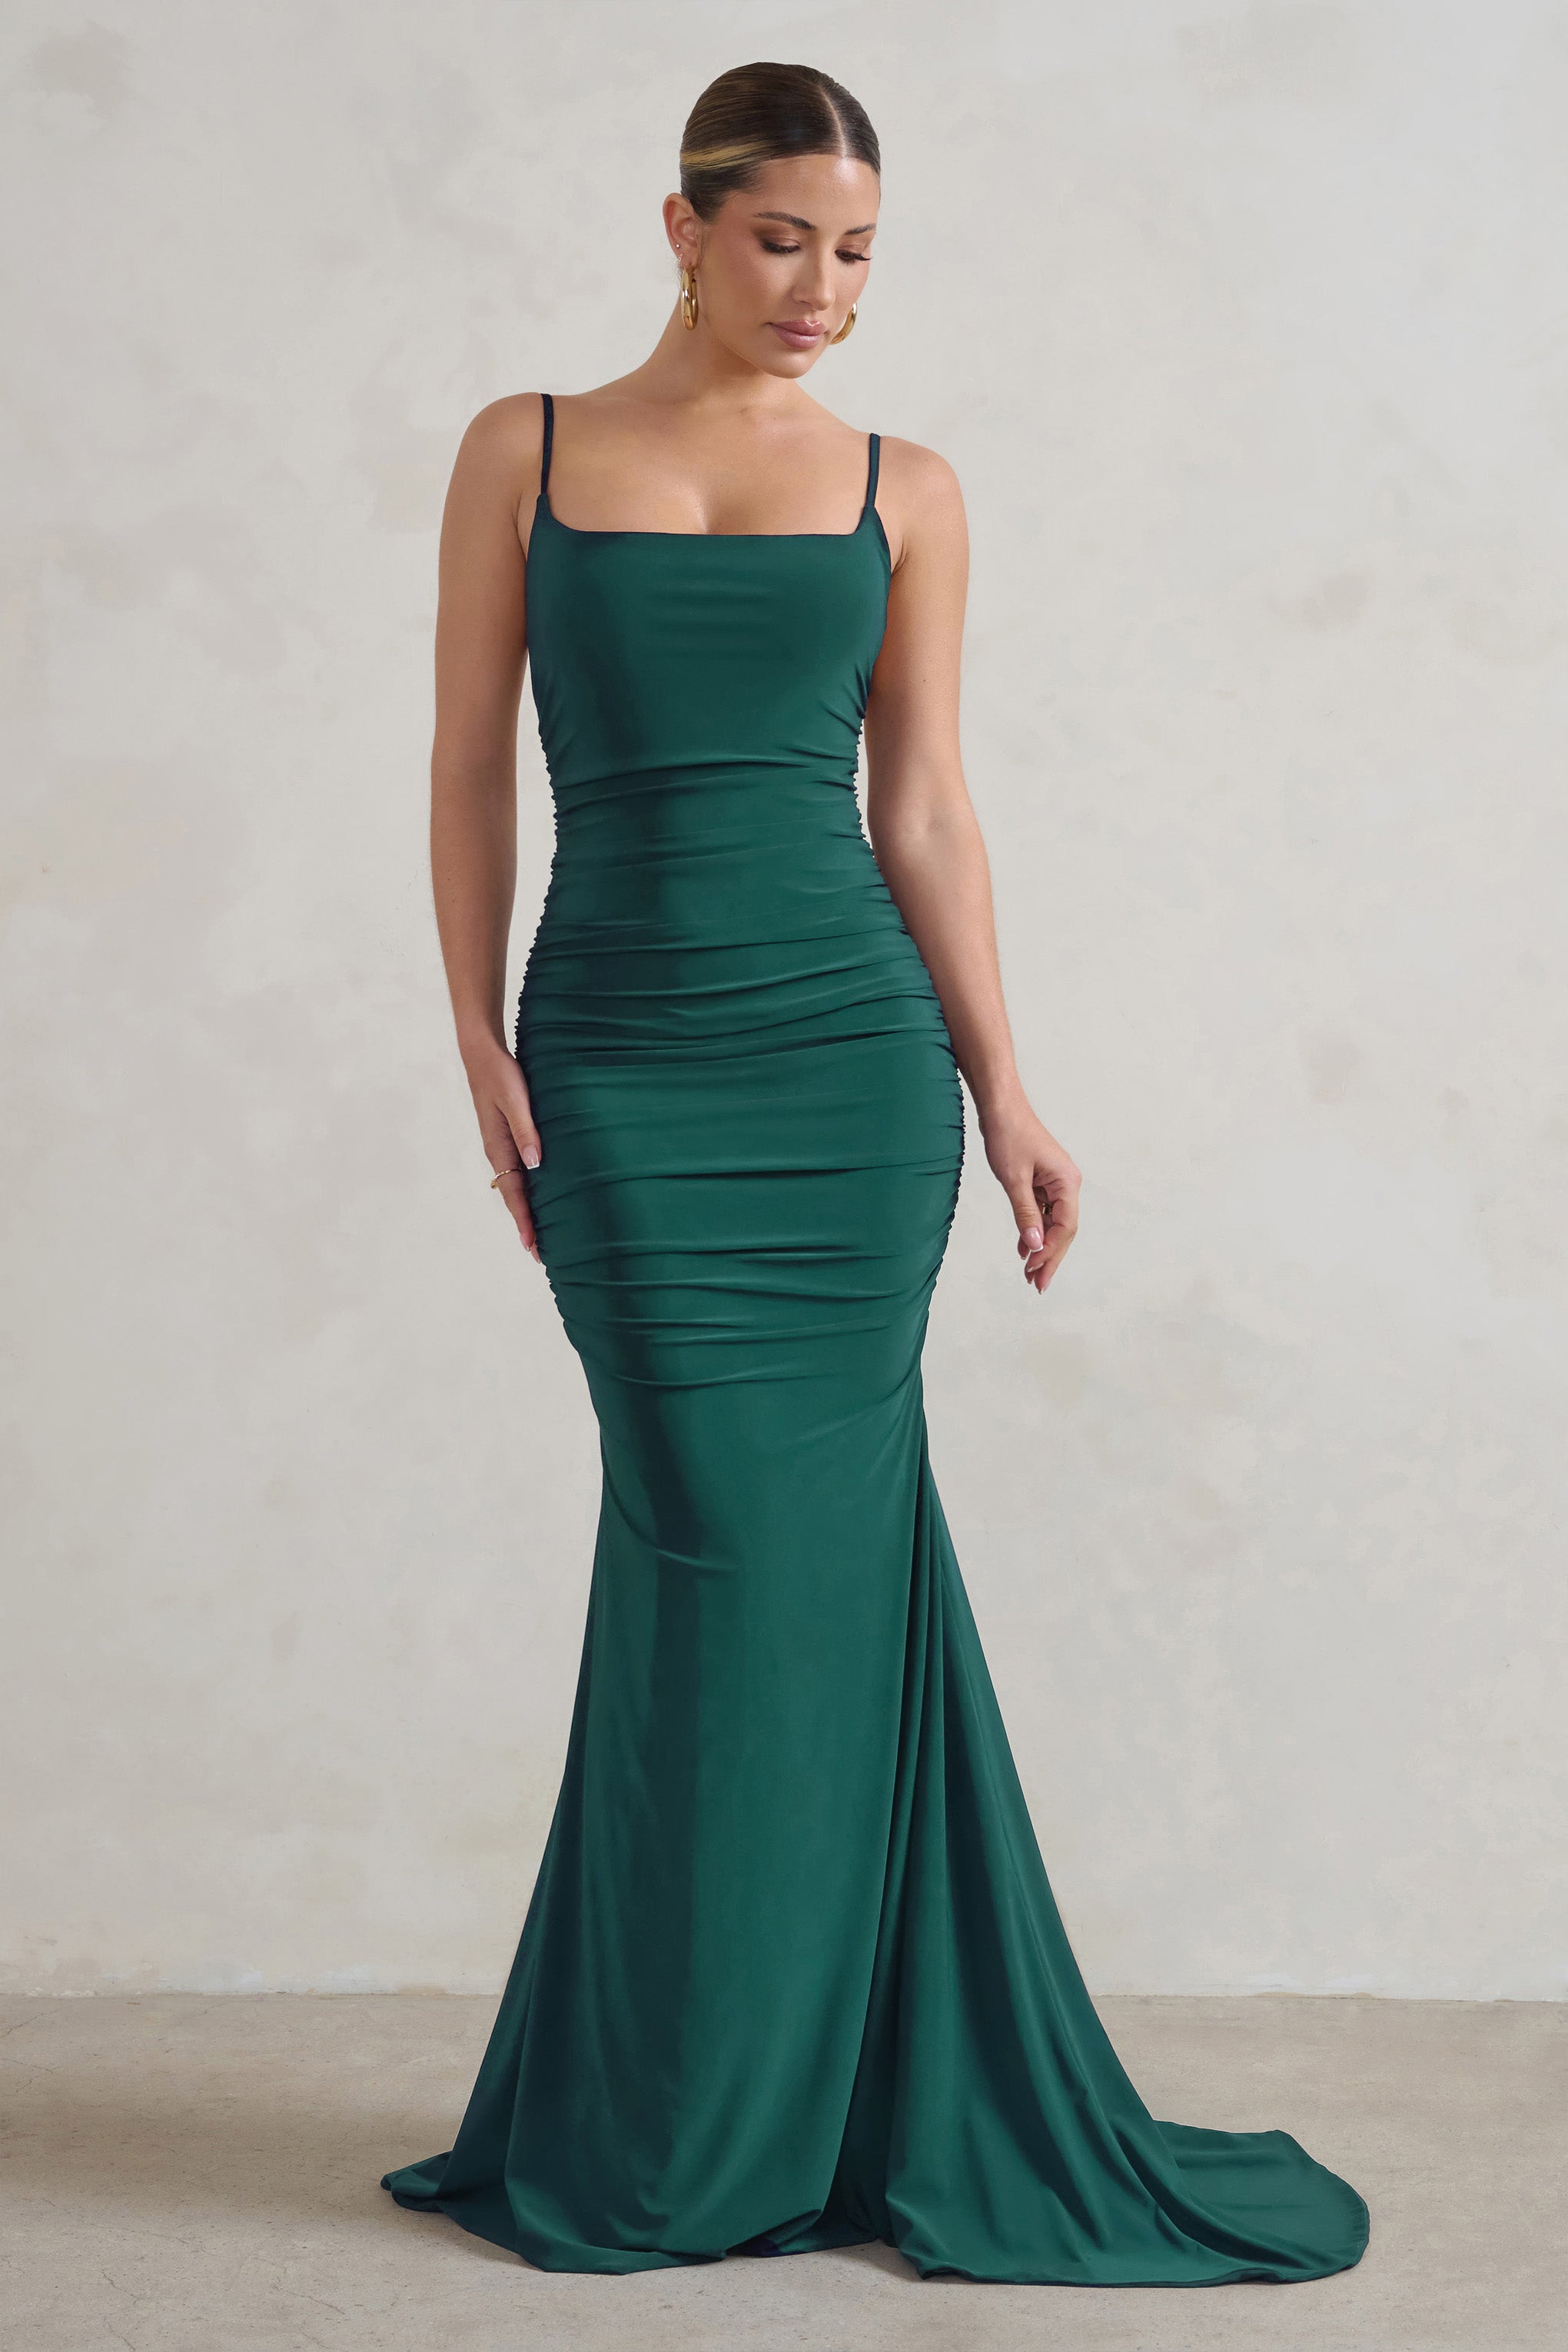 Adele Bottle Green Backless Ruched Fishtail Cami Maxi Dress